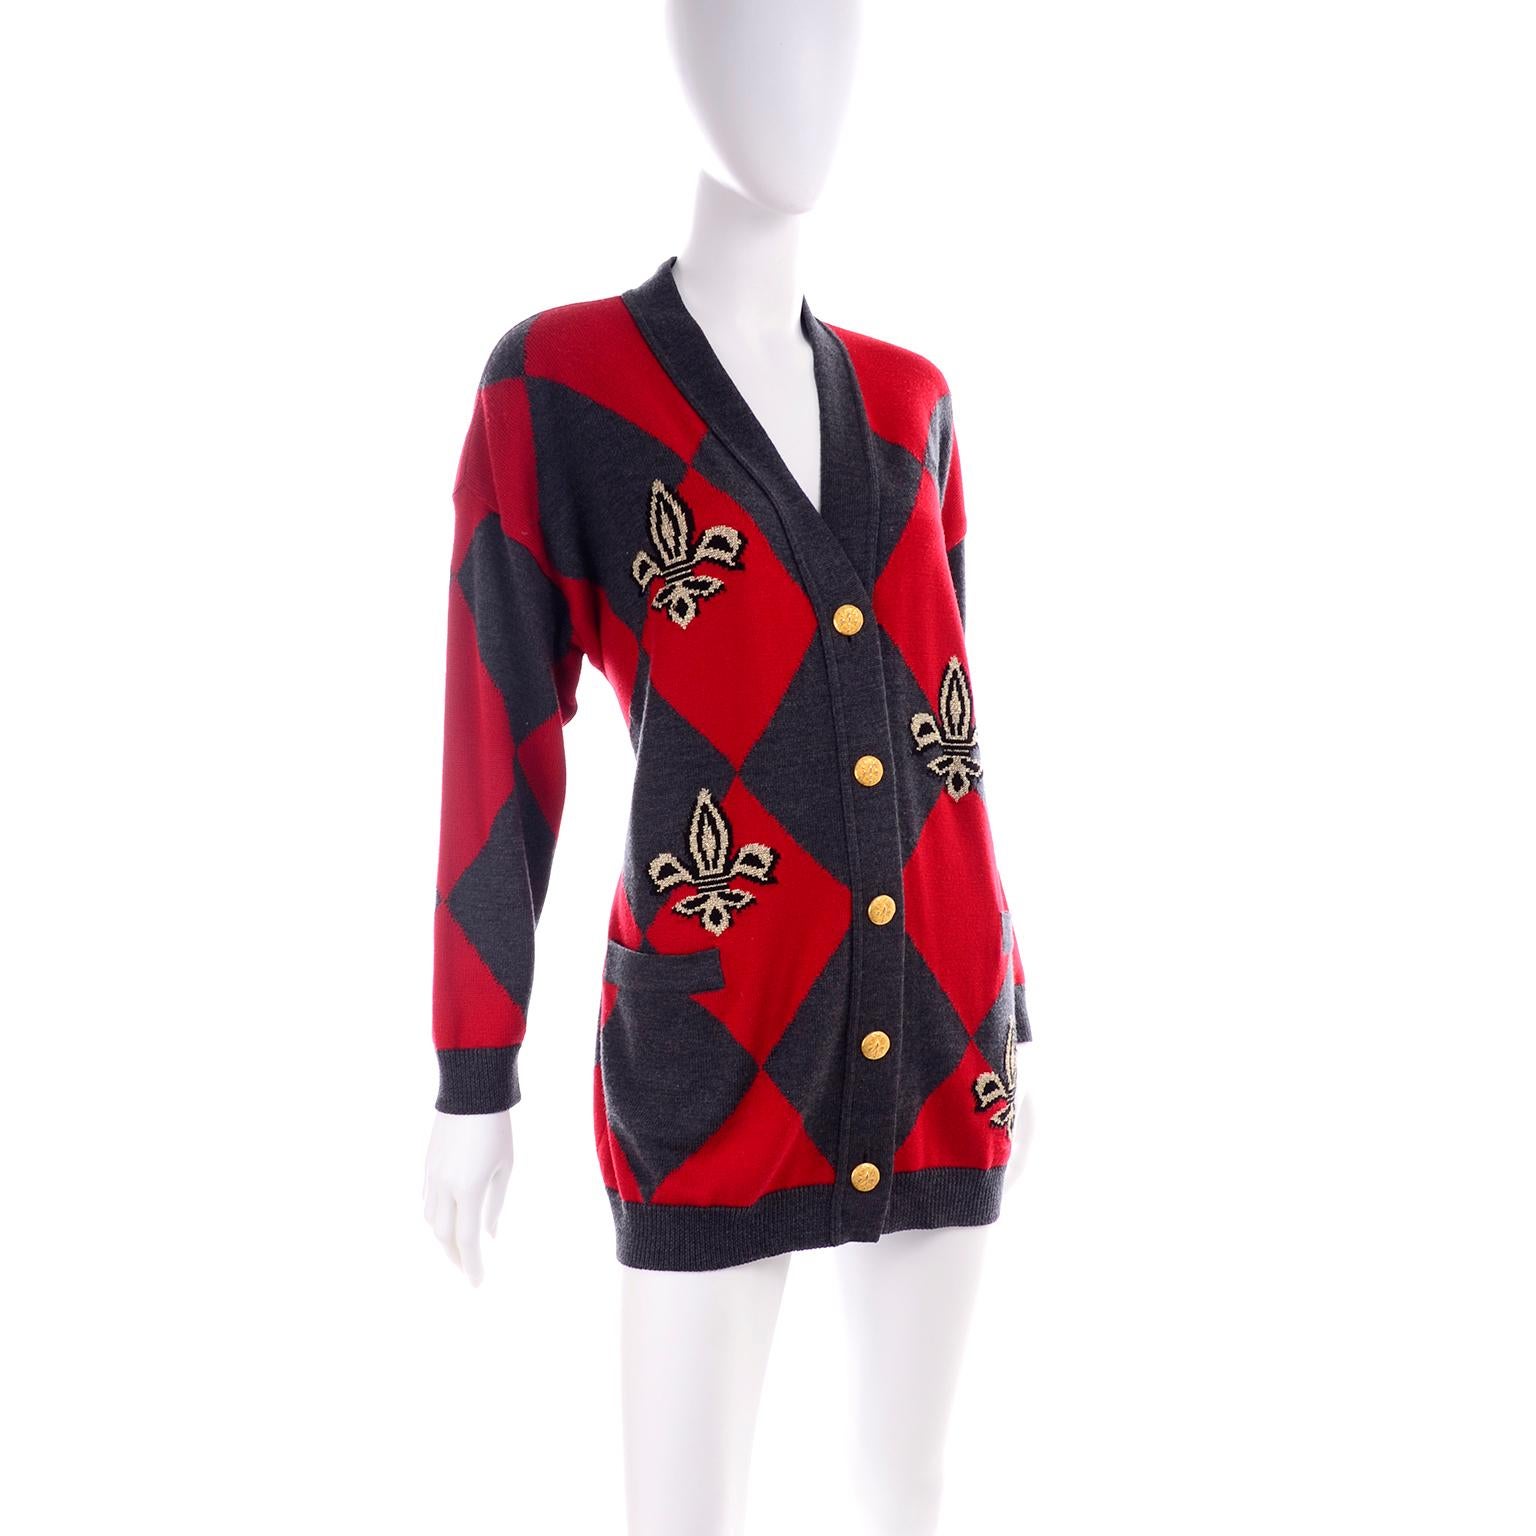 We love vintage Escada sweaters and blouses!  This button front cardigan is made of 96% new wool, 2% Cupro and 2% Polyester.  Labeled a size 36, this sweater has 2 functional pockets and 5 gold fleur de lis buttons and was made in Germany in the